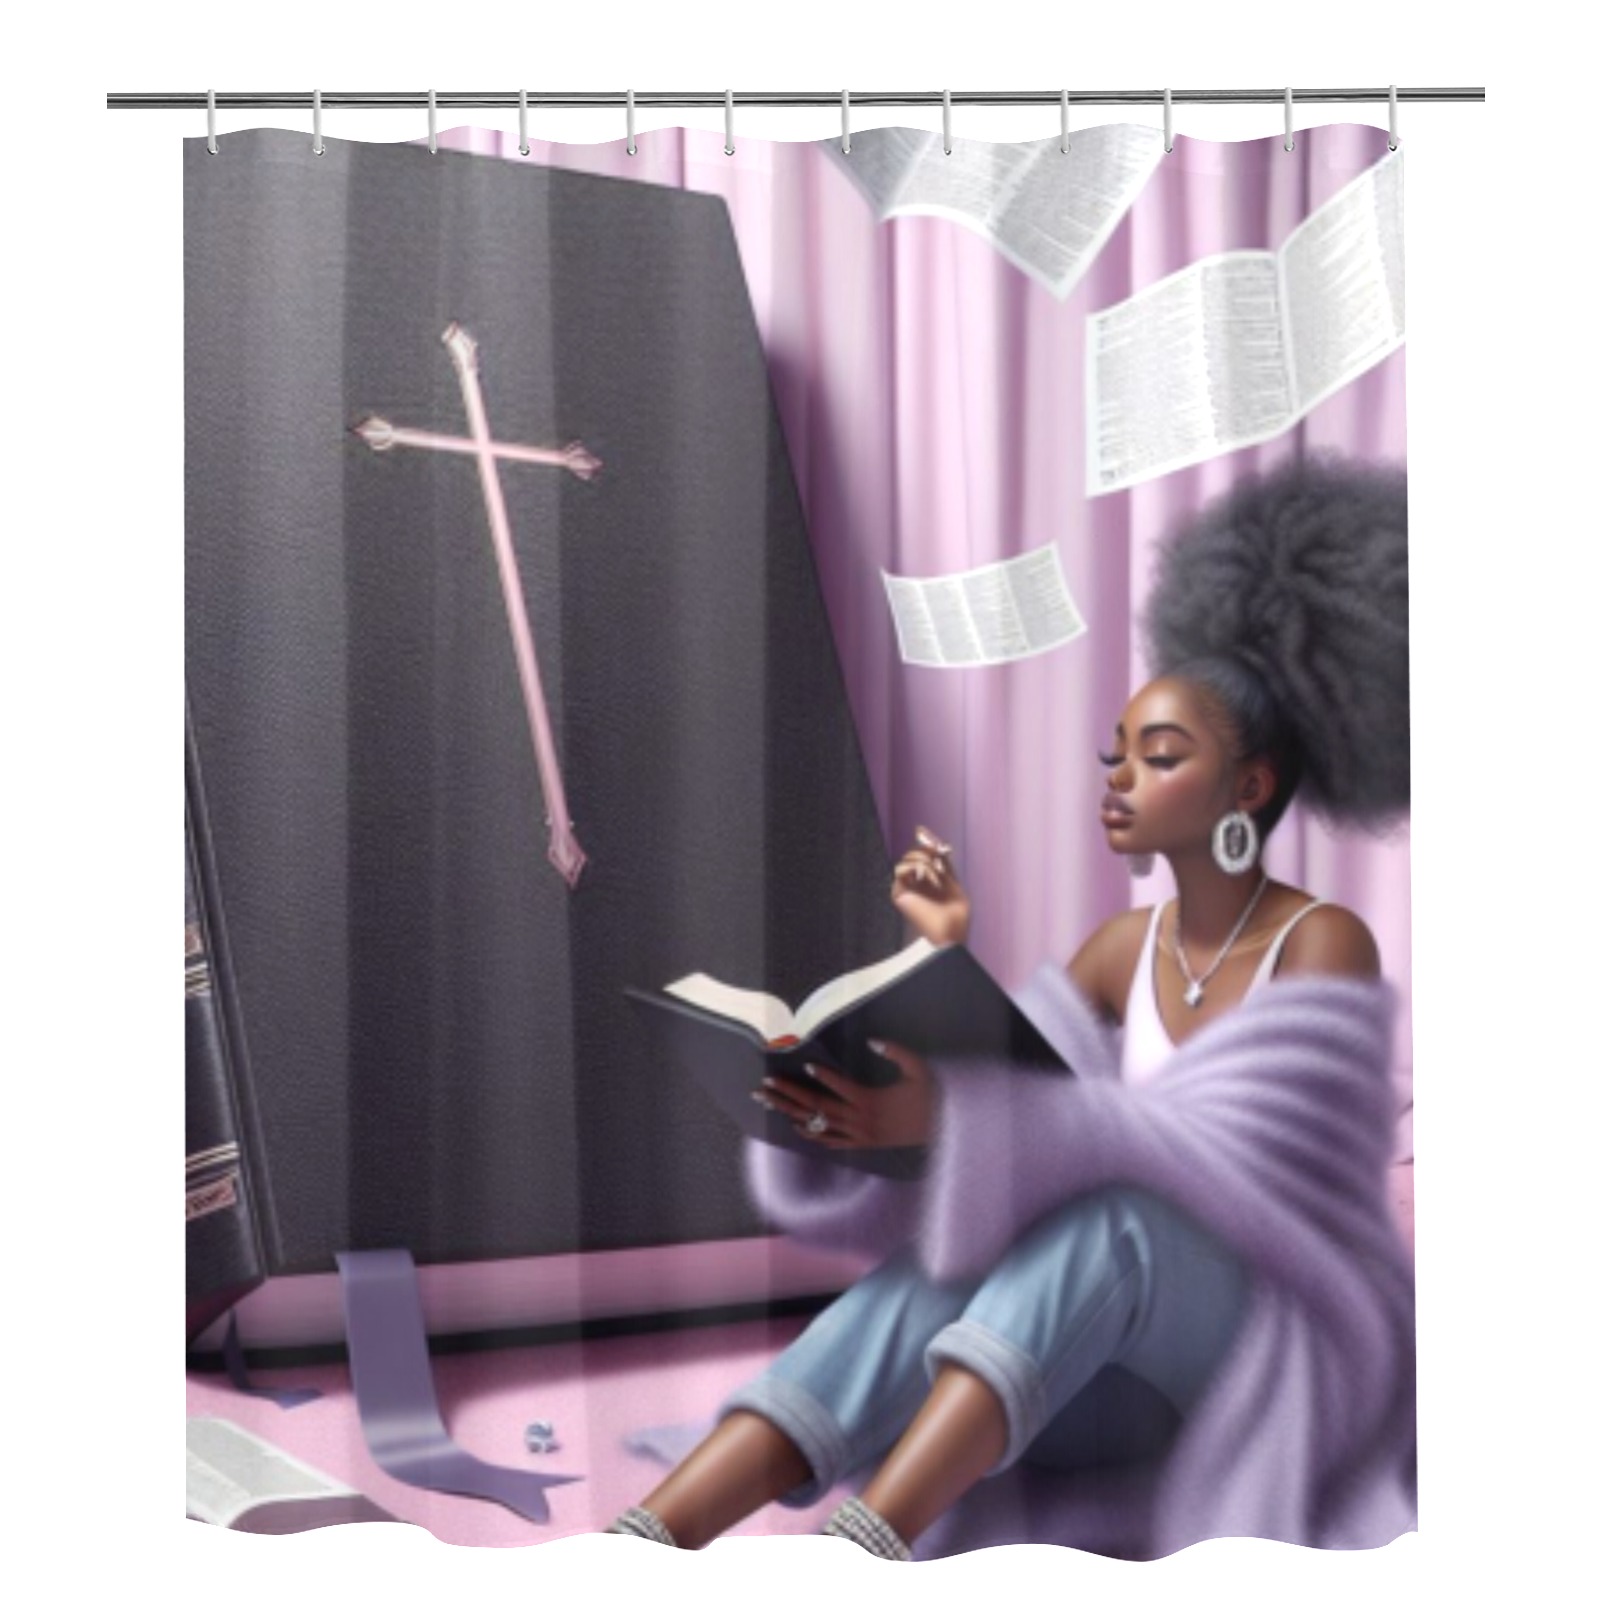 GOD HAS IT ALL WORKED OUT Shower Curtain 72"x84"